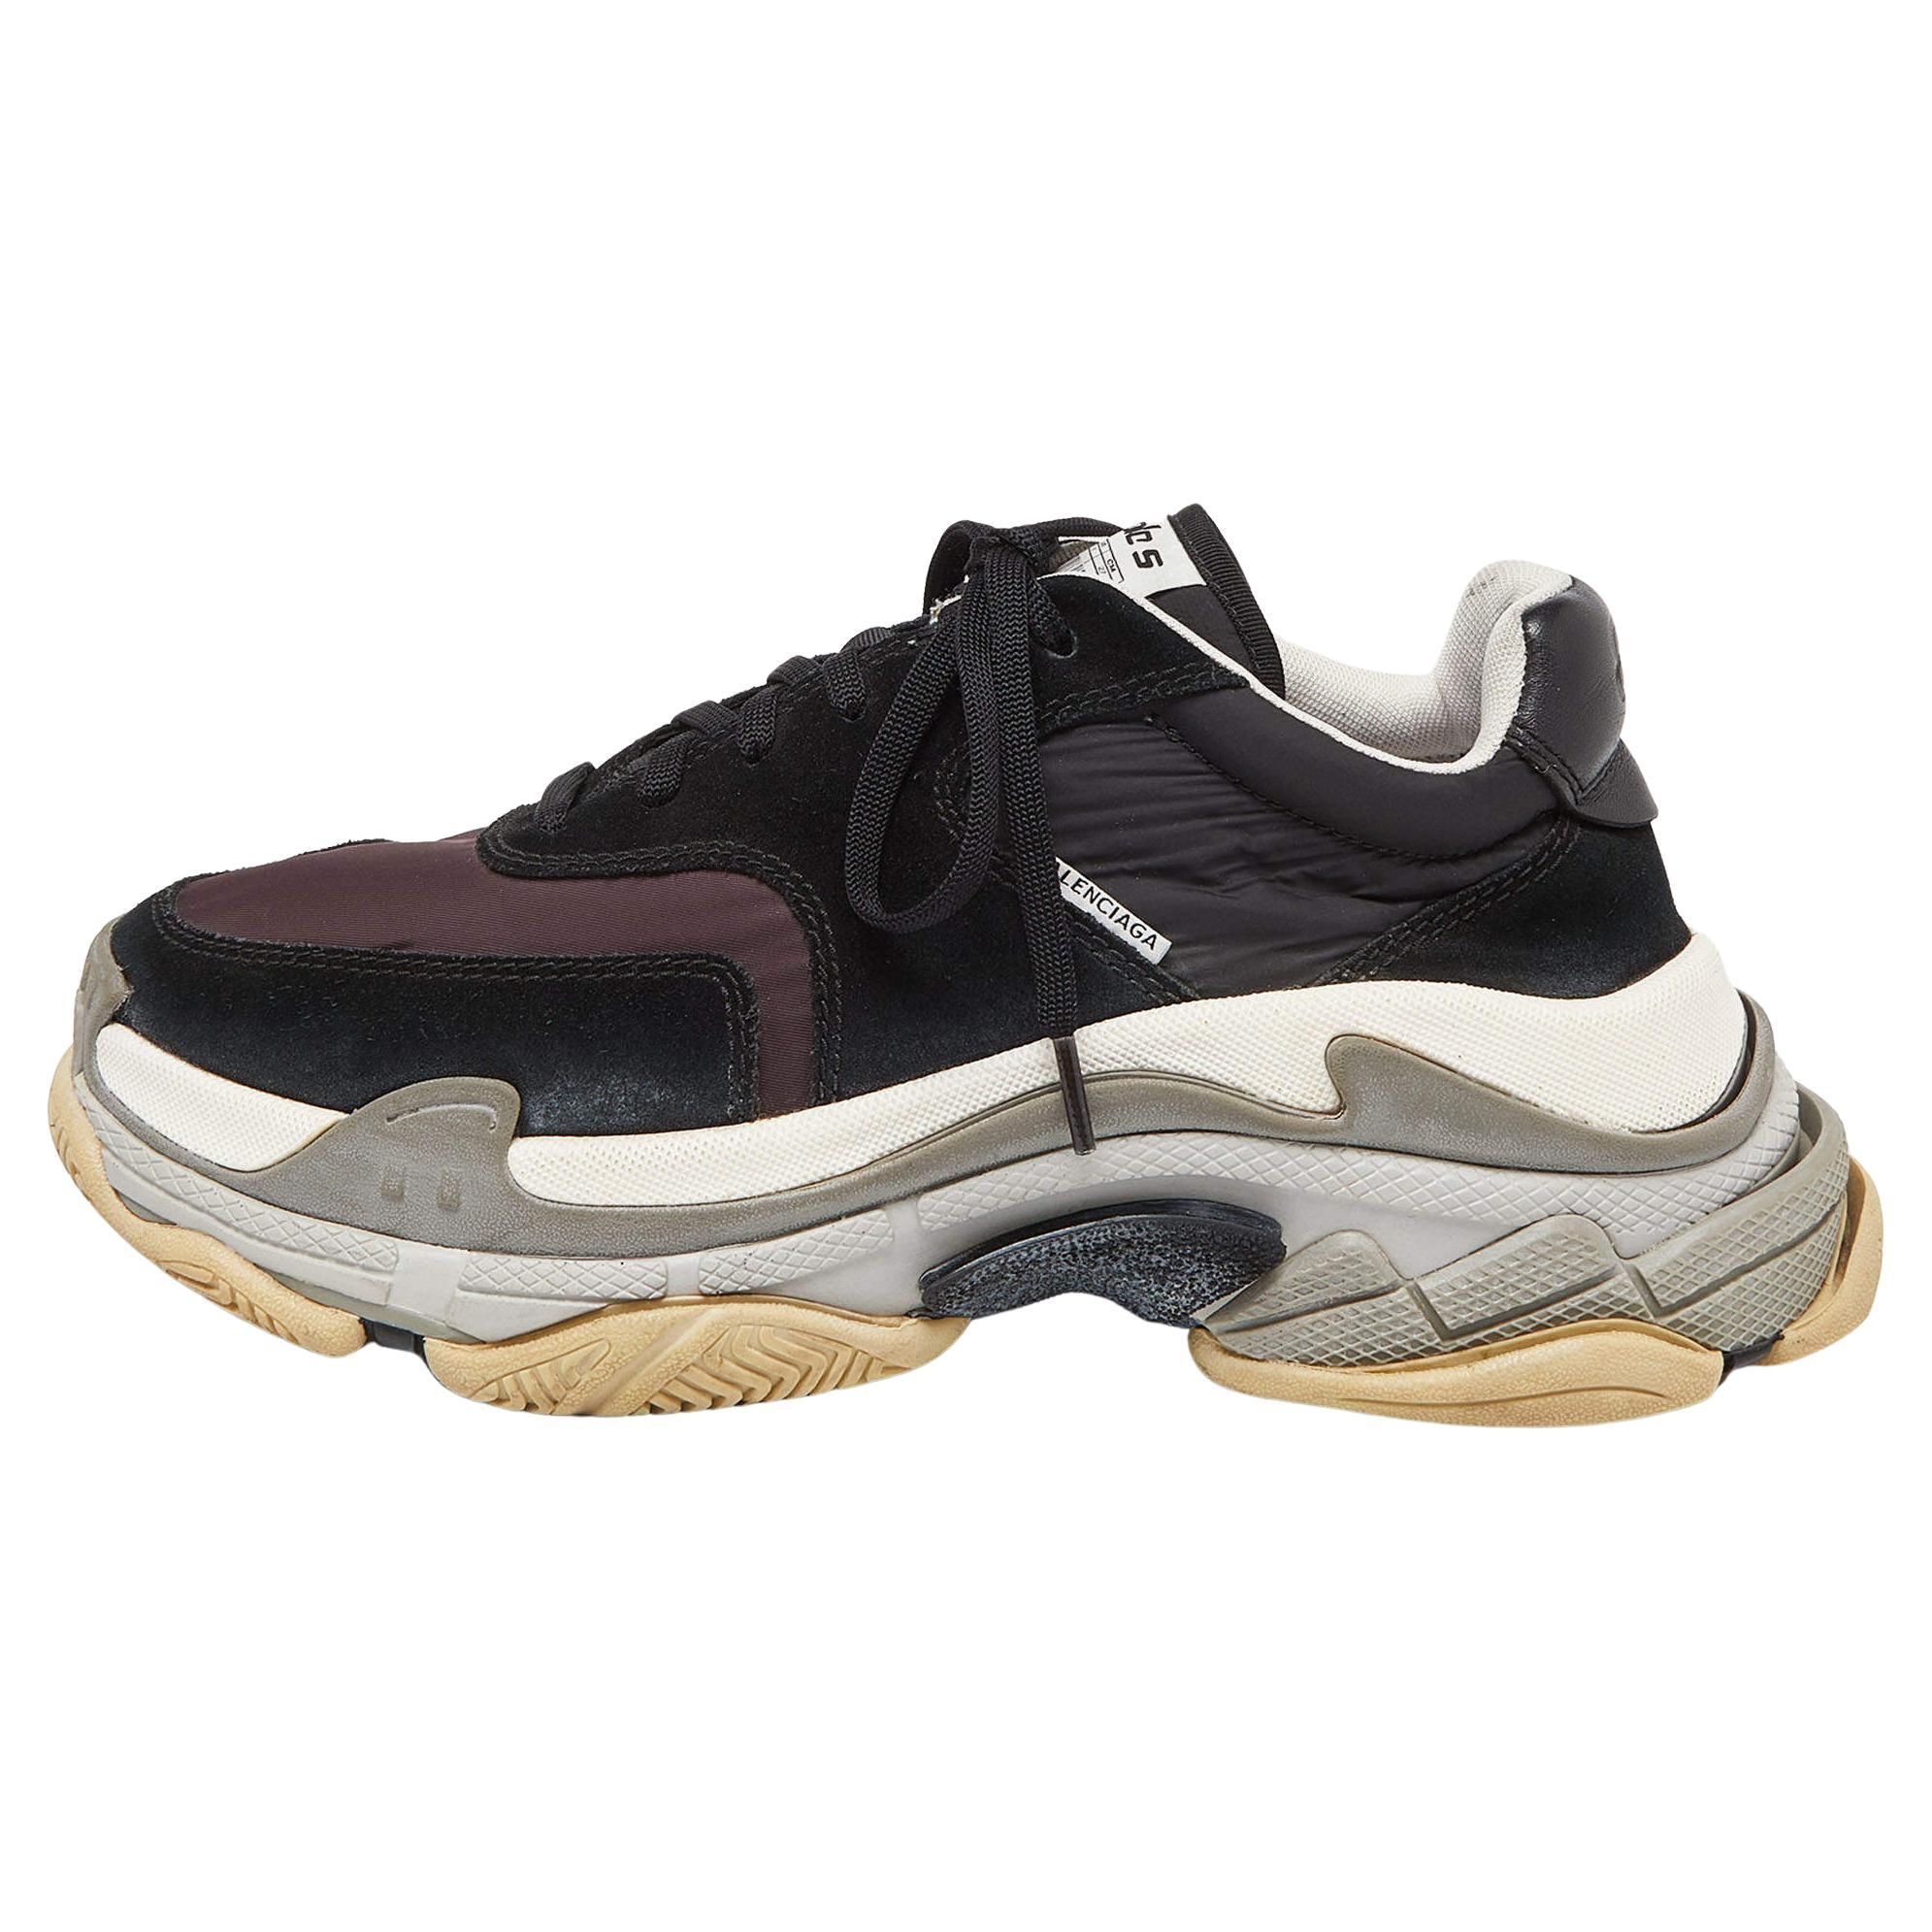 Balenciaga Black/Burgundy Suede and Nylon Triple S Sneakers Size 41 For Sale